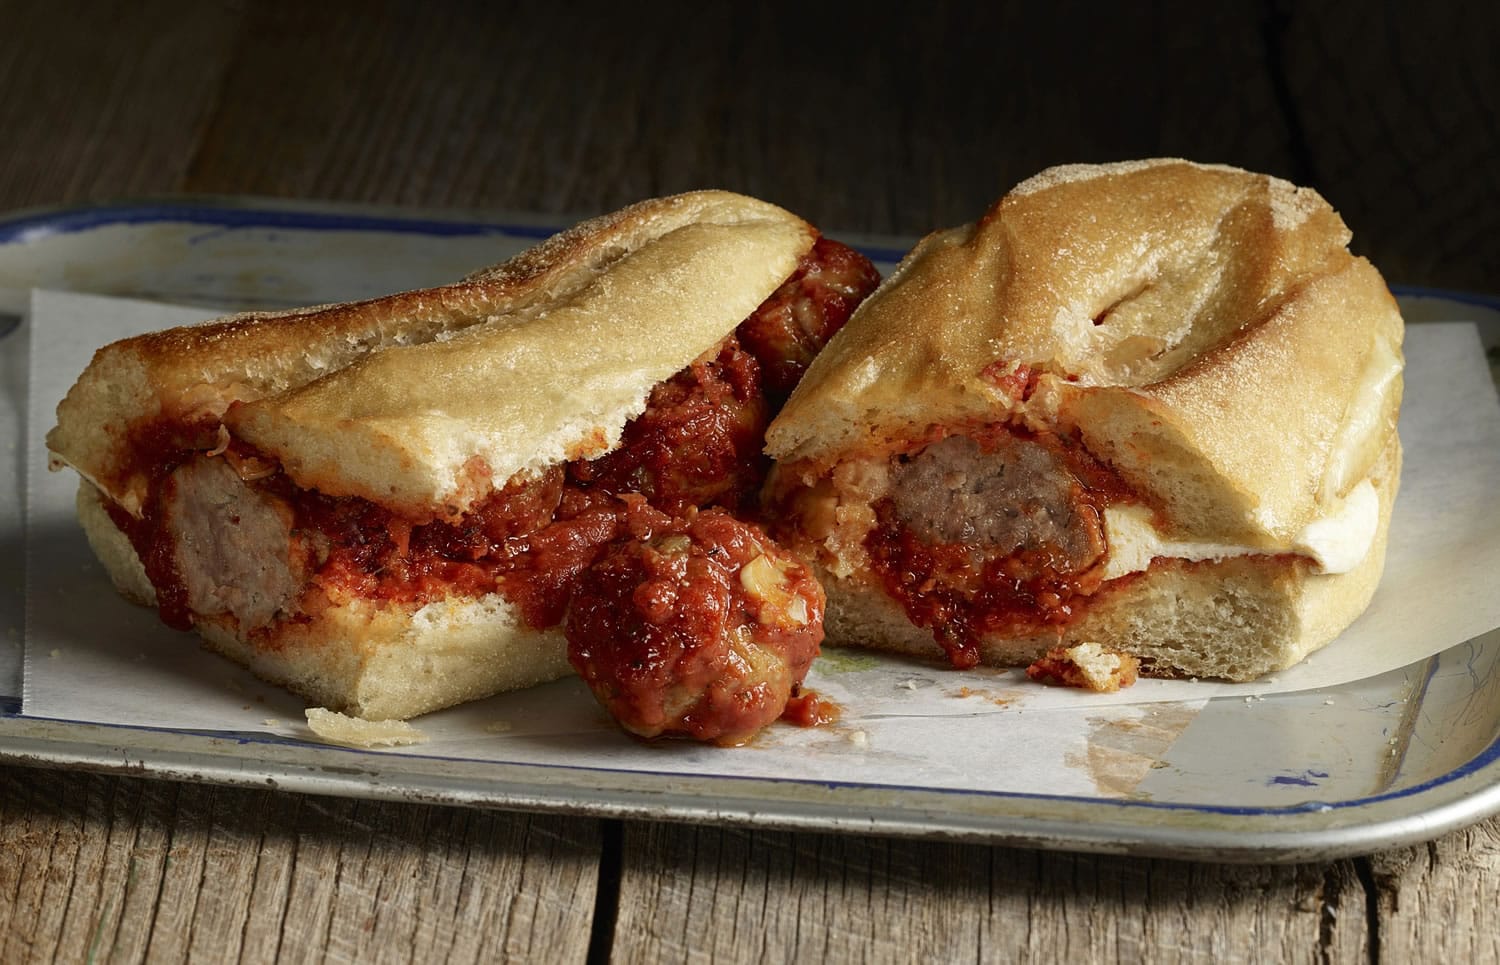 &quot;This doesn't exist in Italy,&quot; says chef Bob Kinkead, pointing to what's left of the saucy, gooey Campono Meatball Sub.